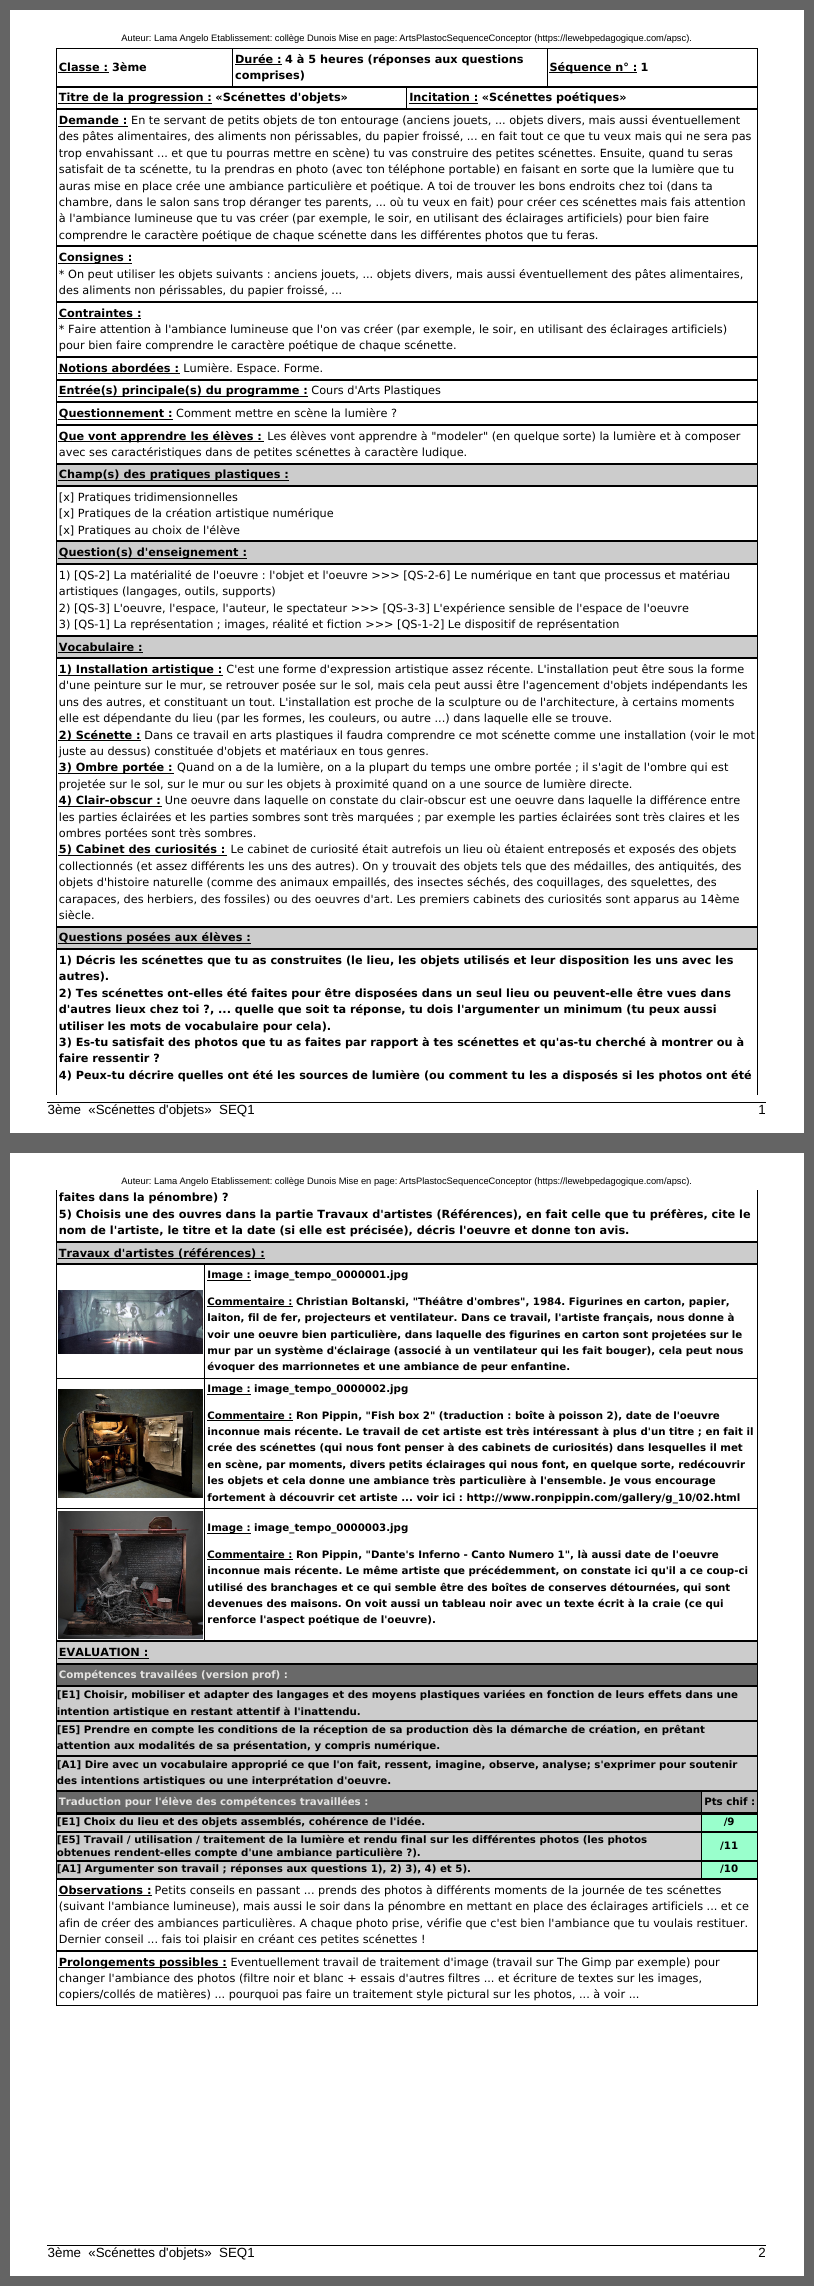 [Image: 12_06_2020_didac_themes_apparence_des_fiches_000.png]